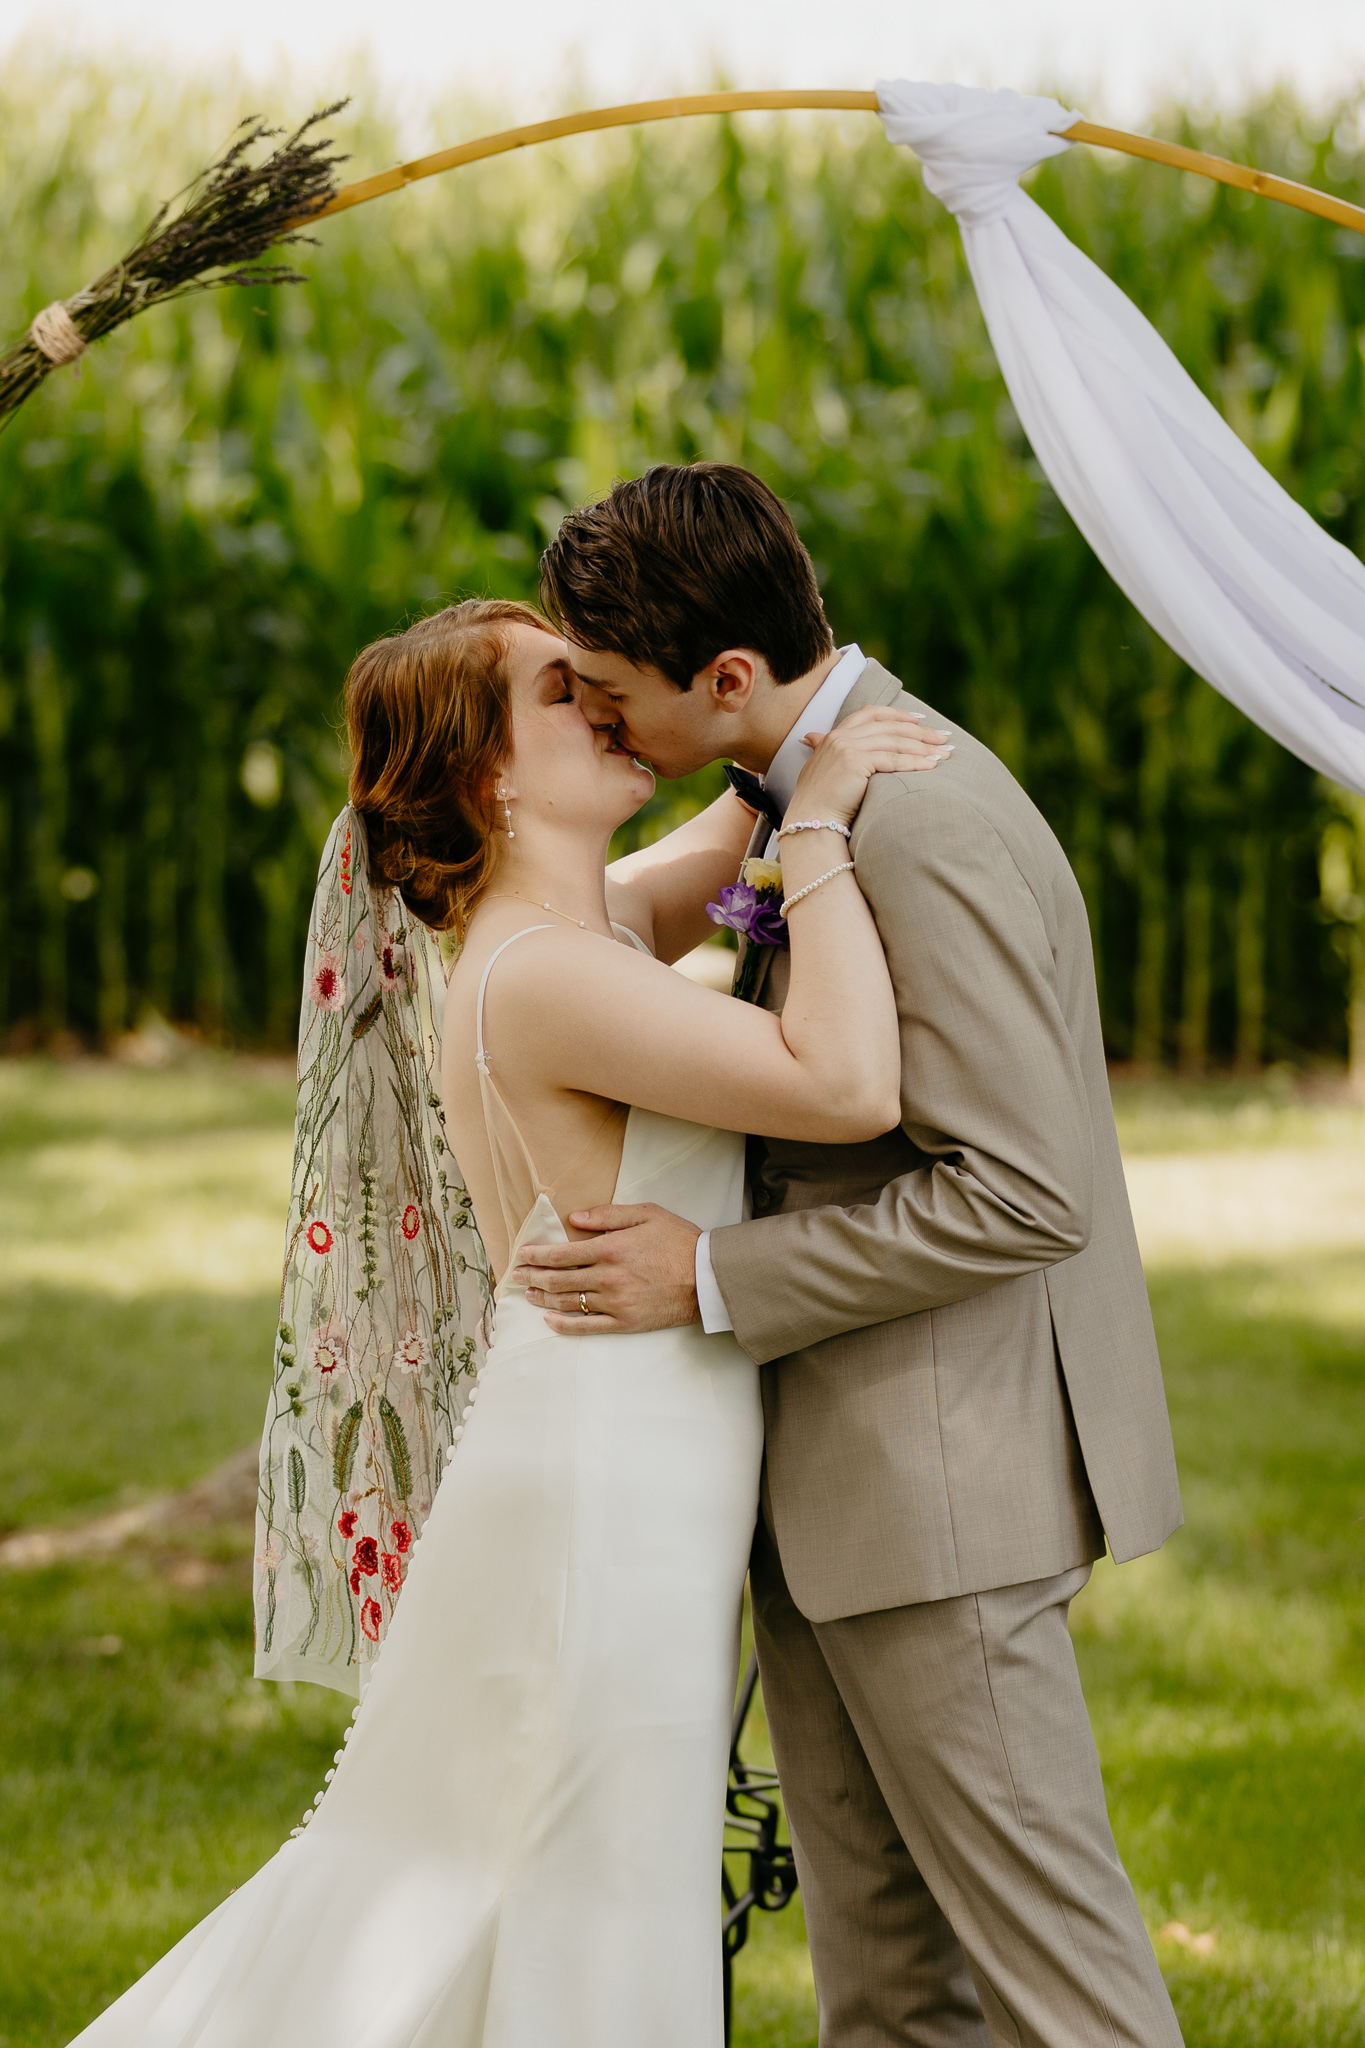 Intimate Indiana Outdoor Wedding in Summer // Ceremony & First Kiss